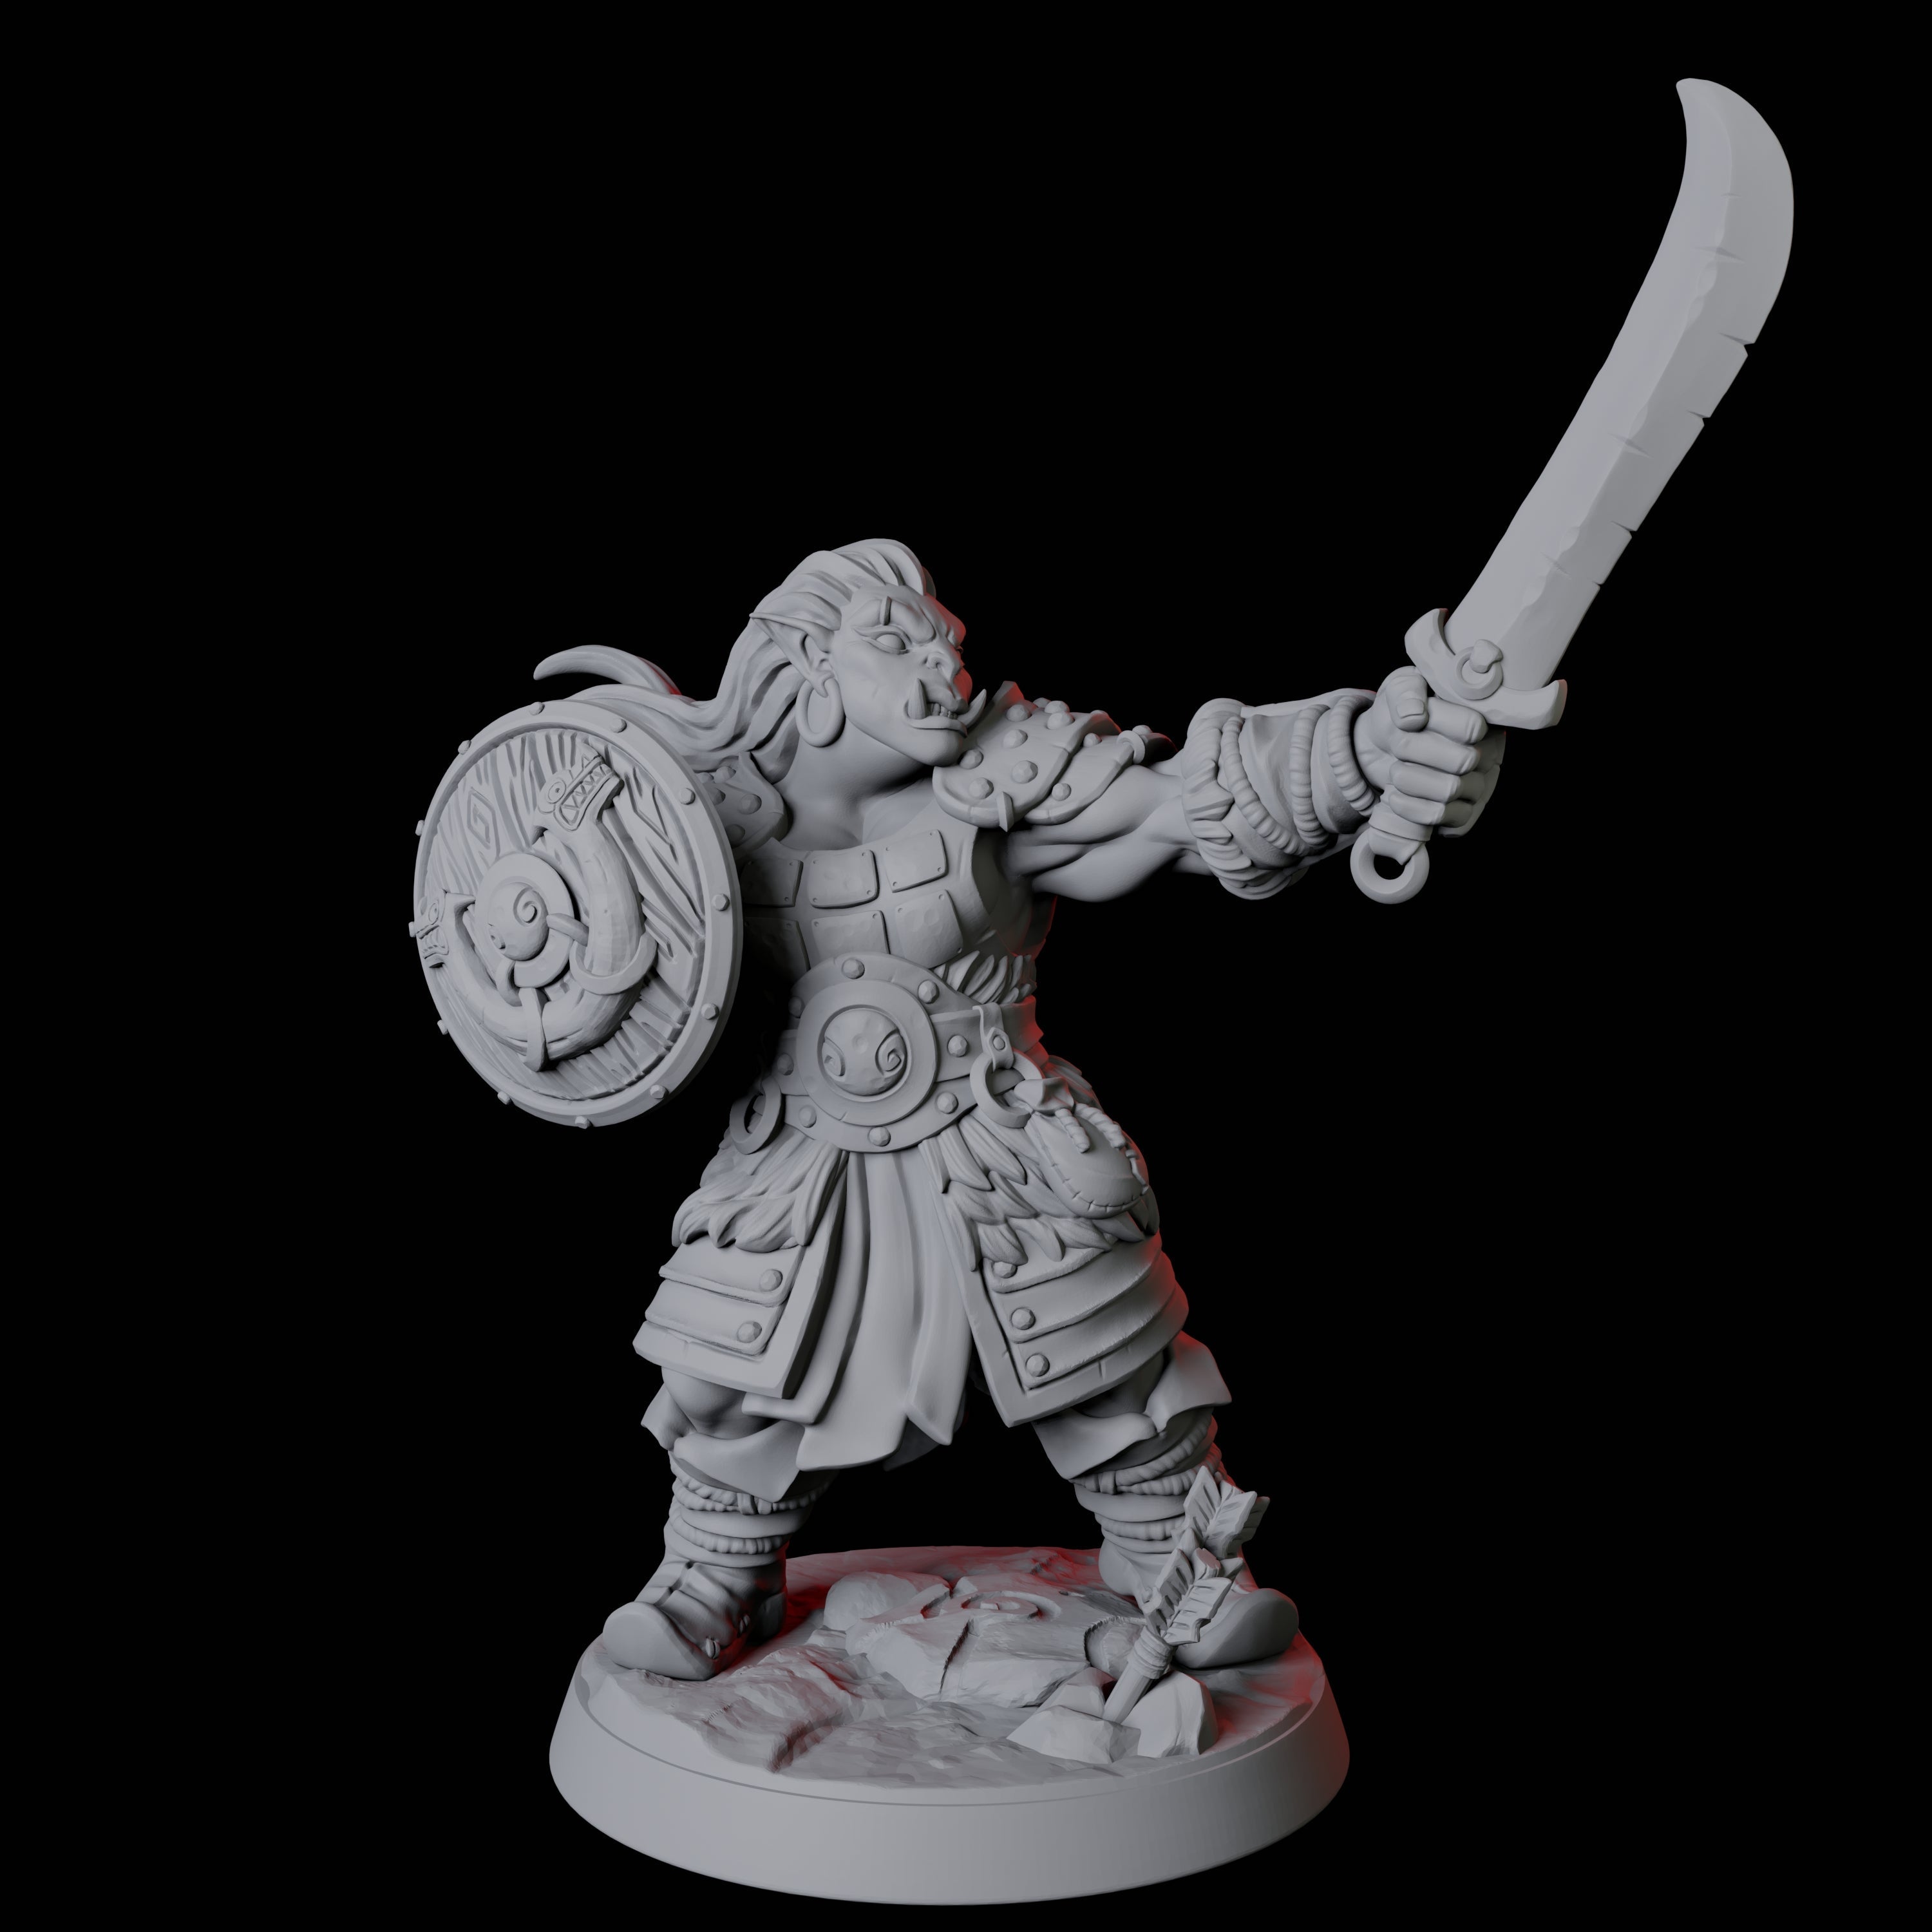 Mountain Orc Warrior E Miniature for Dungeons and Dragons, Pathfinder or other TTRPGs